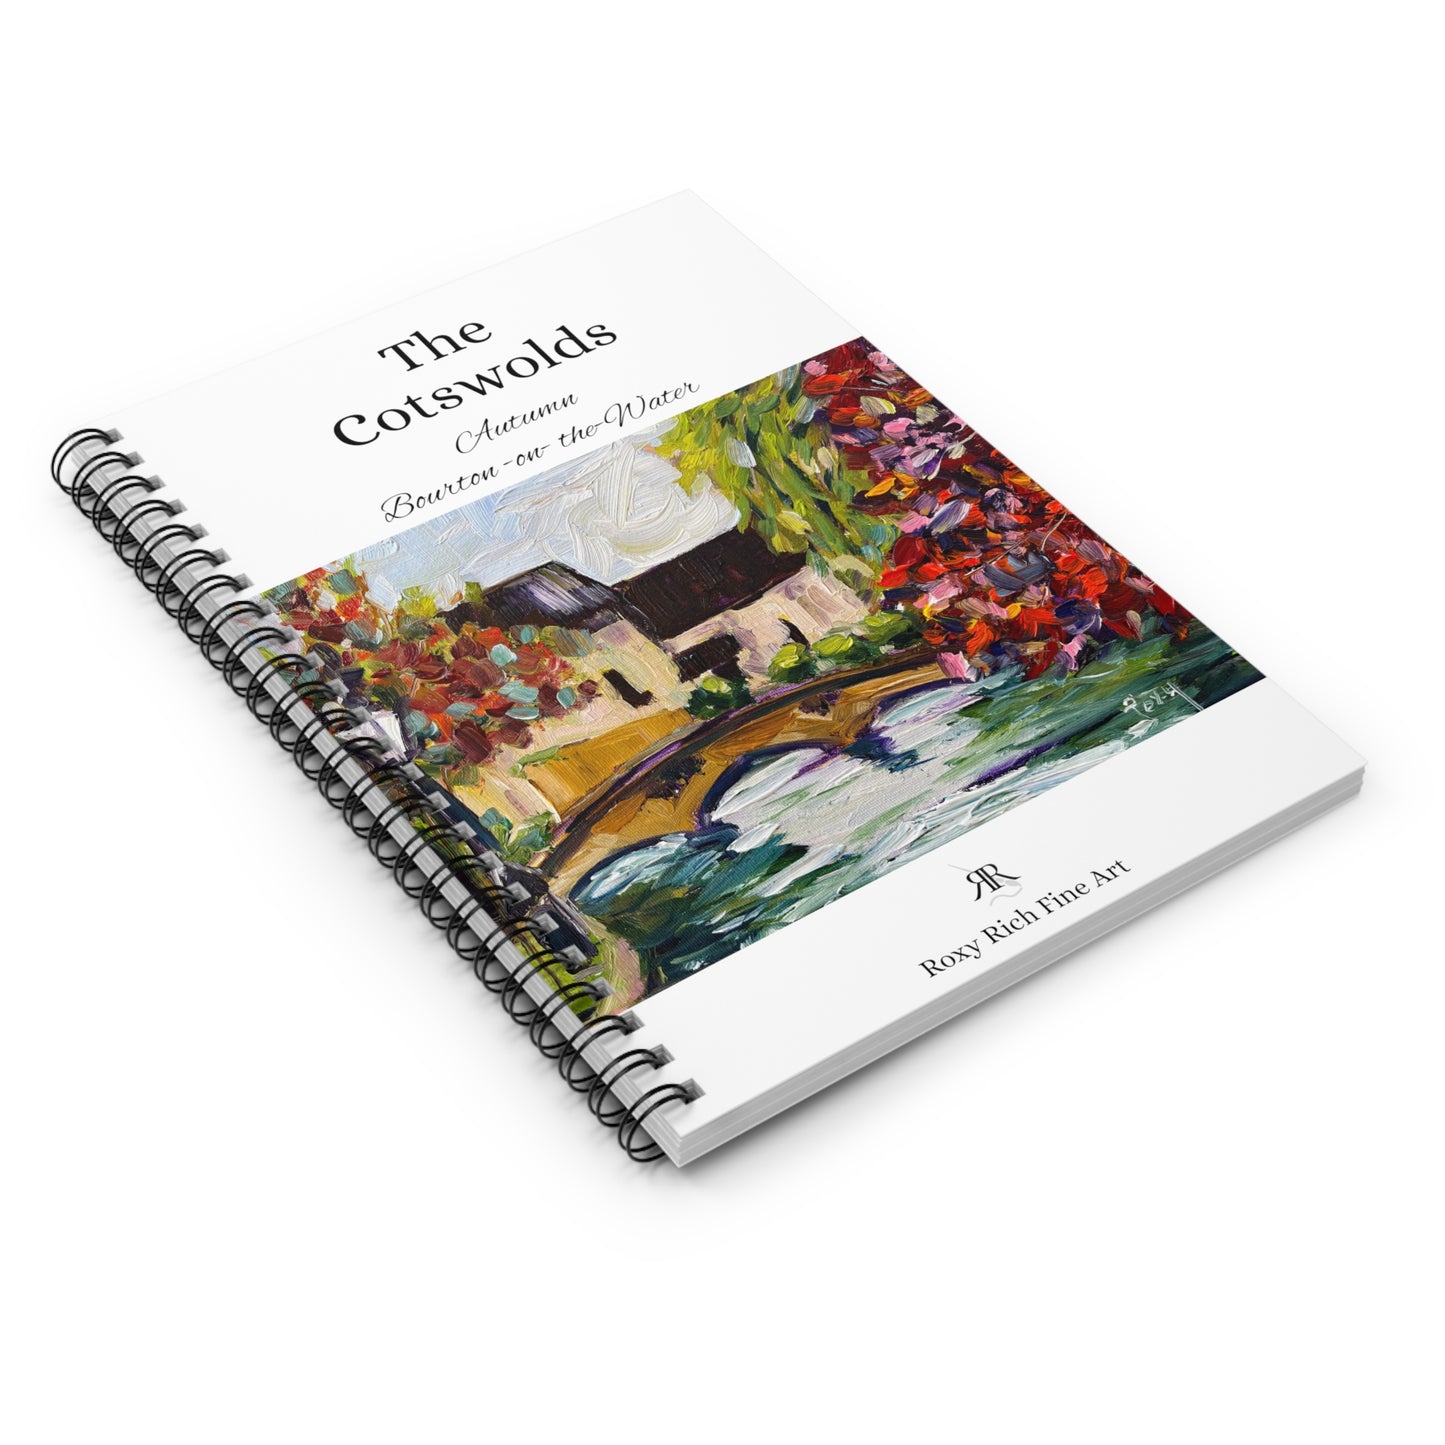 Otoño en Bourton on the Water "The Cotswolds" Cuaderno de espiral